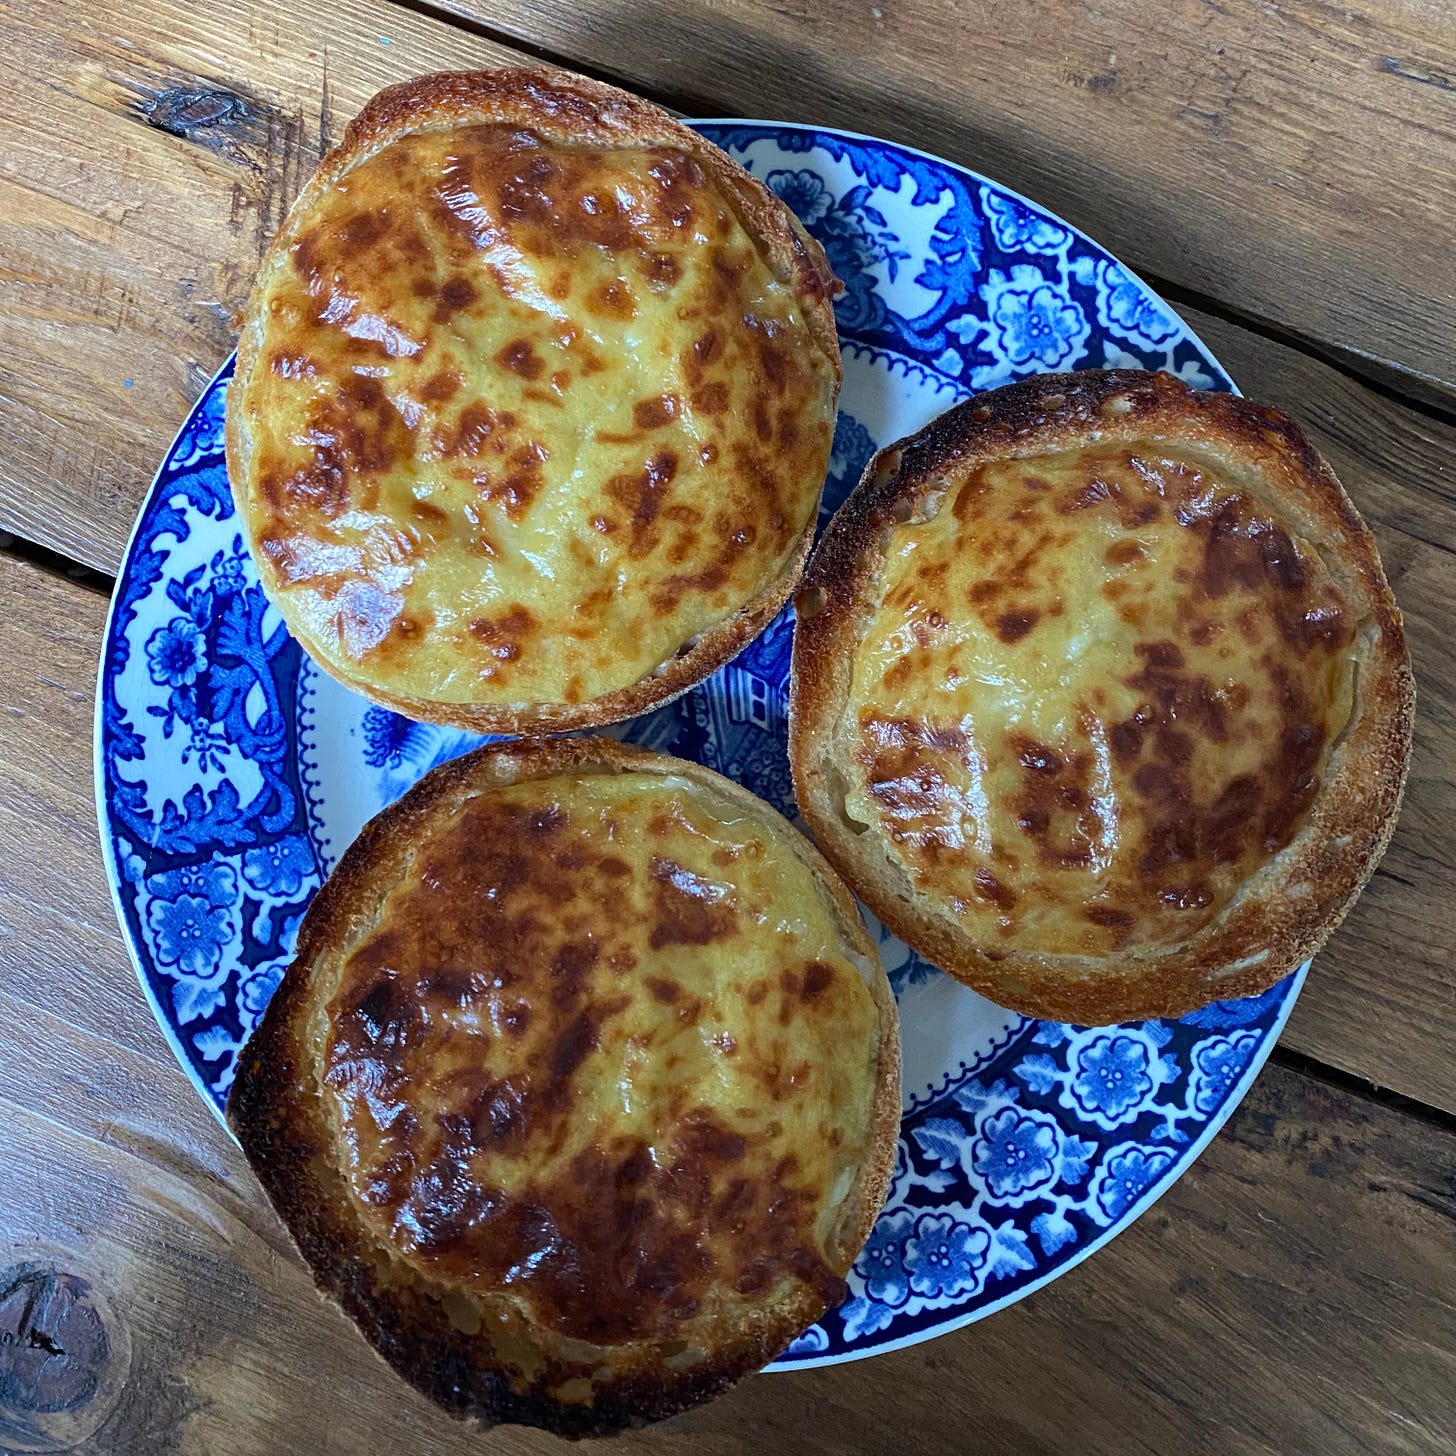 Three english muffins topped with Welsh Rarebit, on a blue & white plate